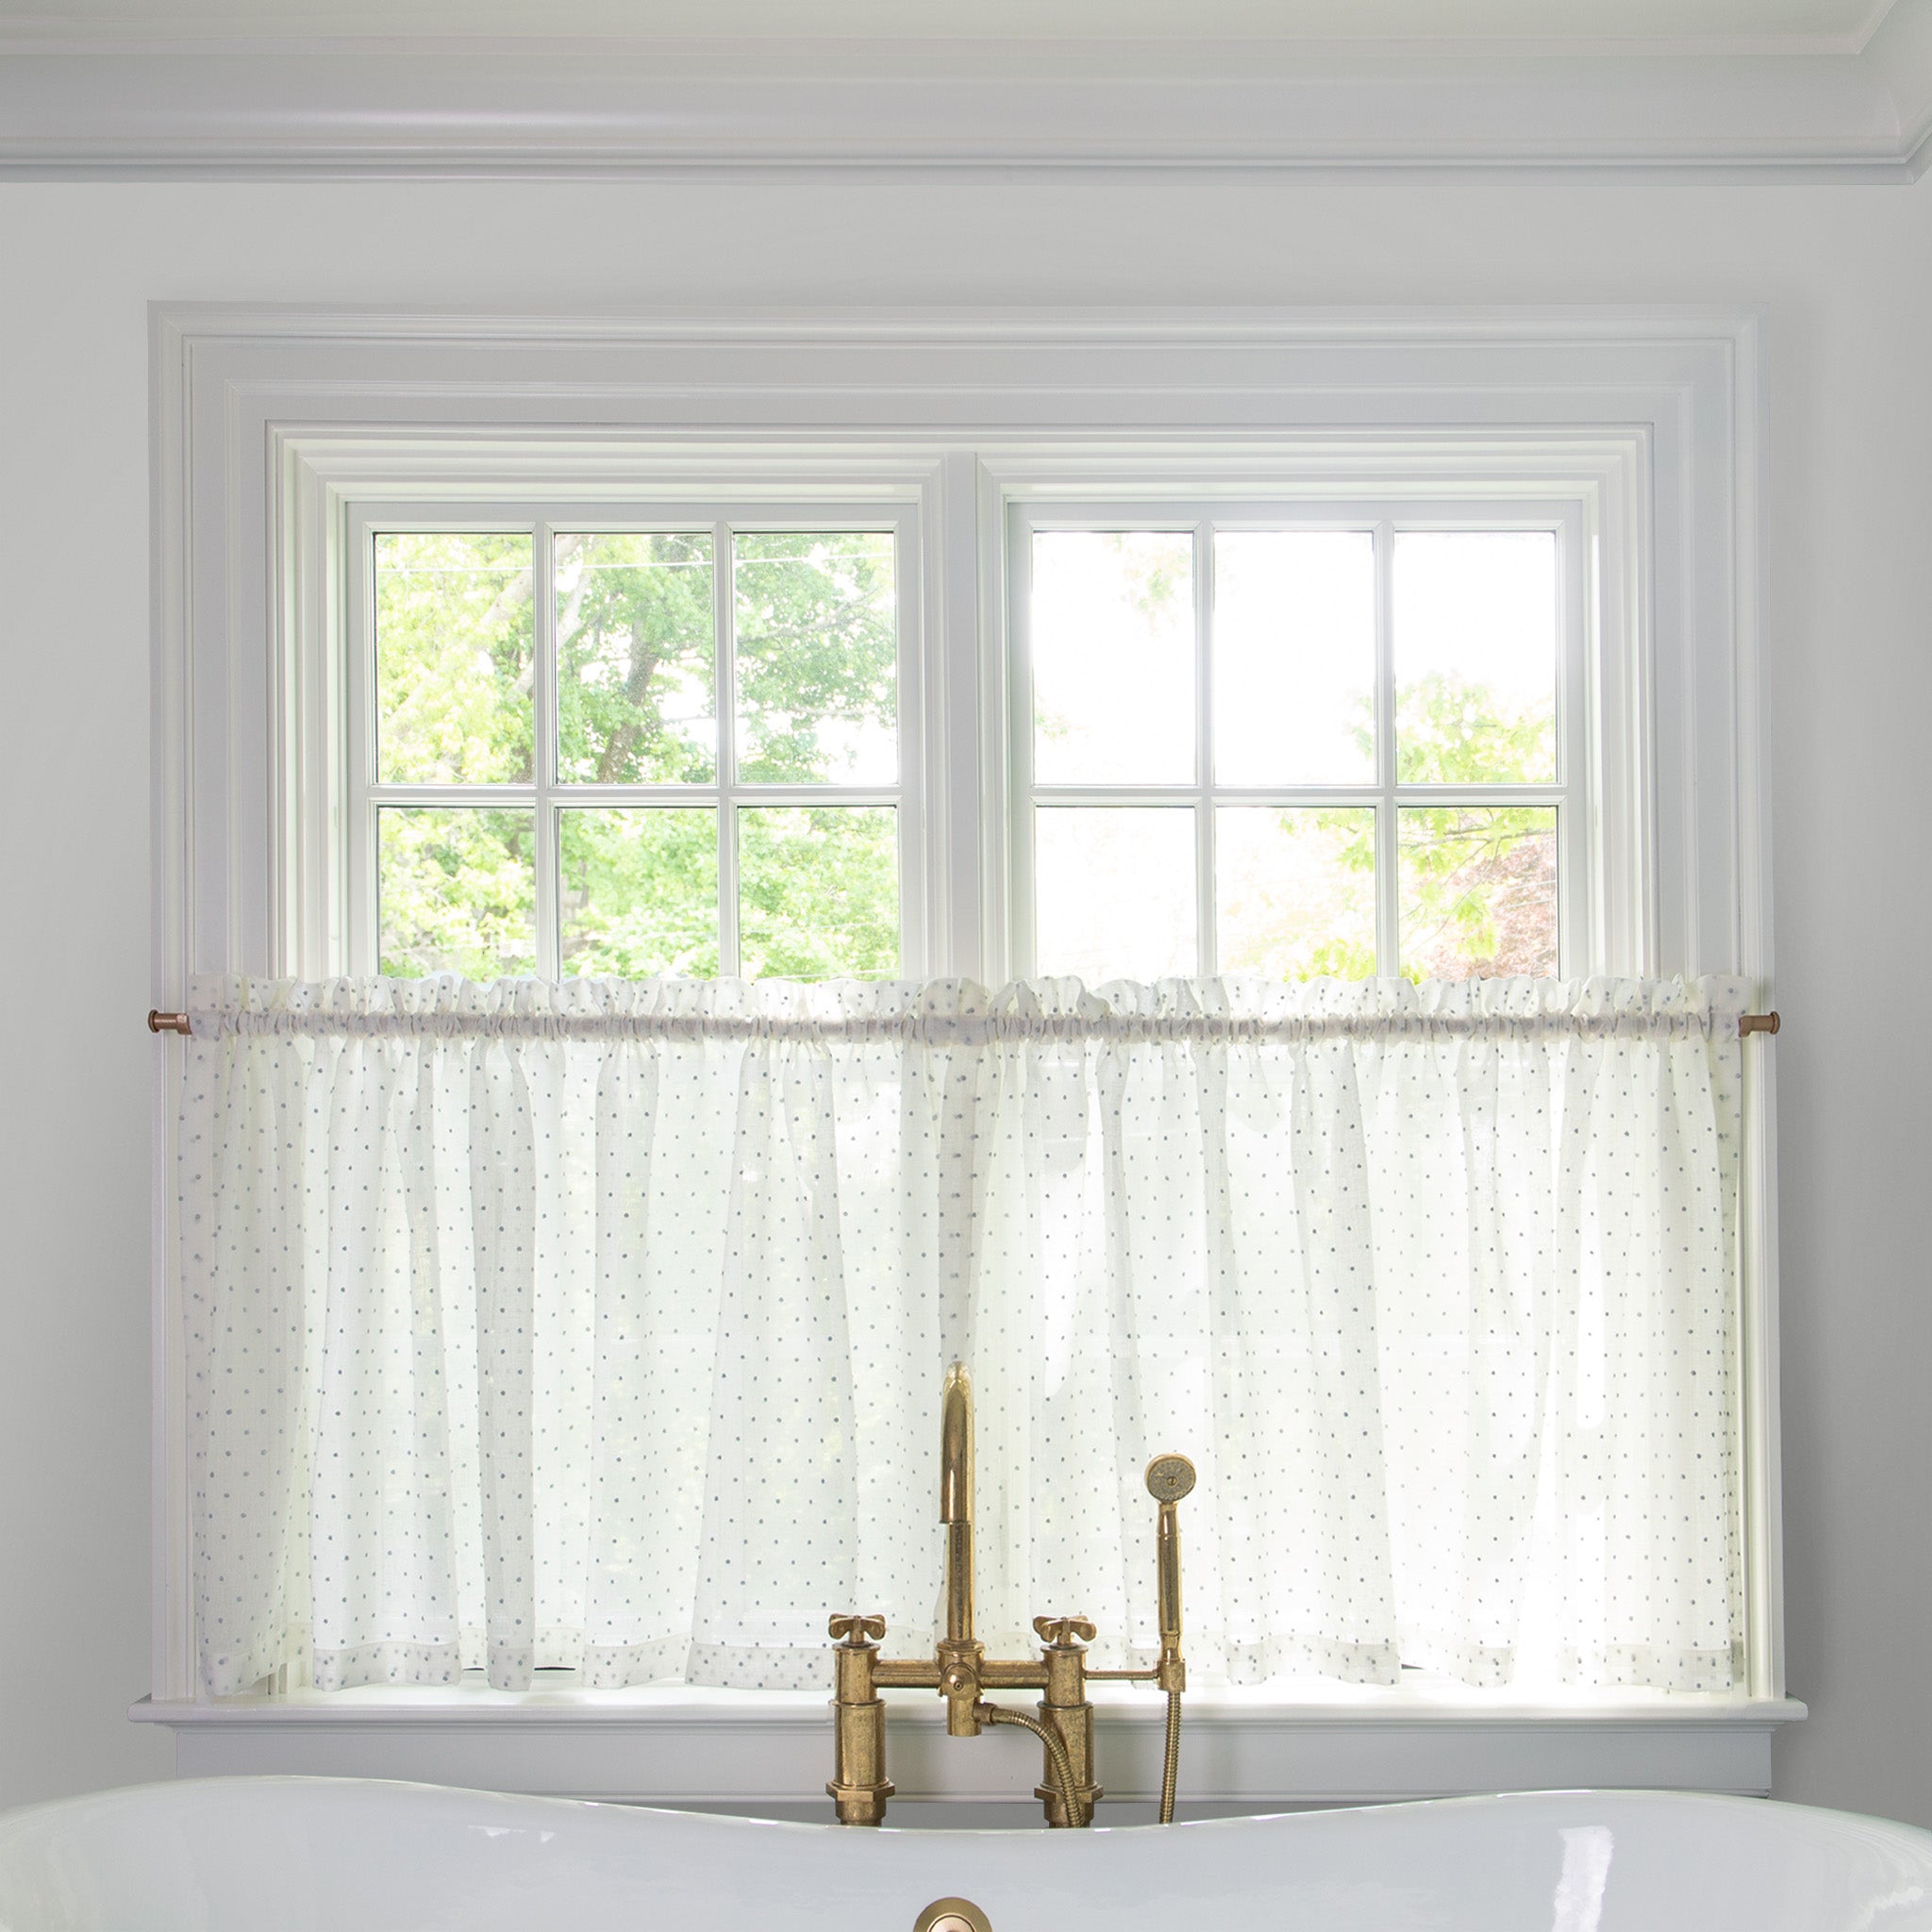 sheer white curtain embroidered with sky blue polka dots on a metal rod in front of an illuminated window in a bathroom